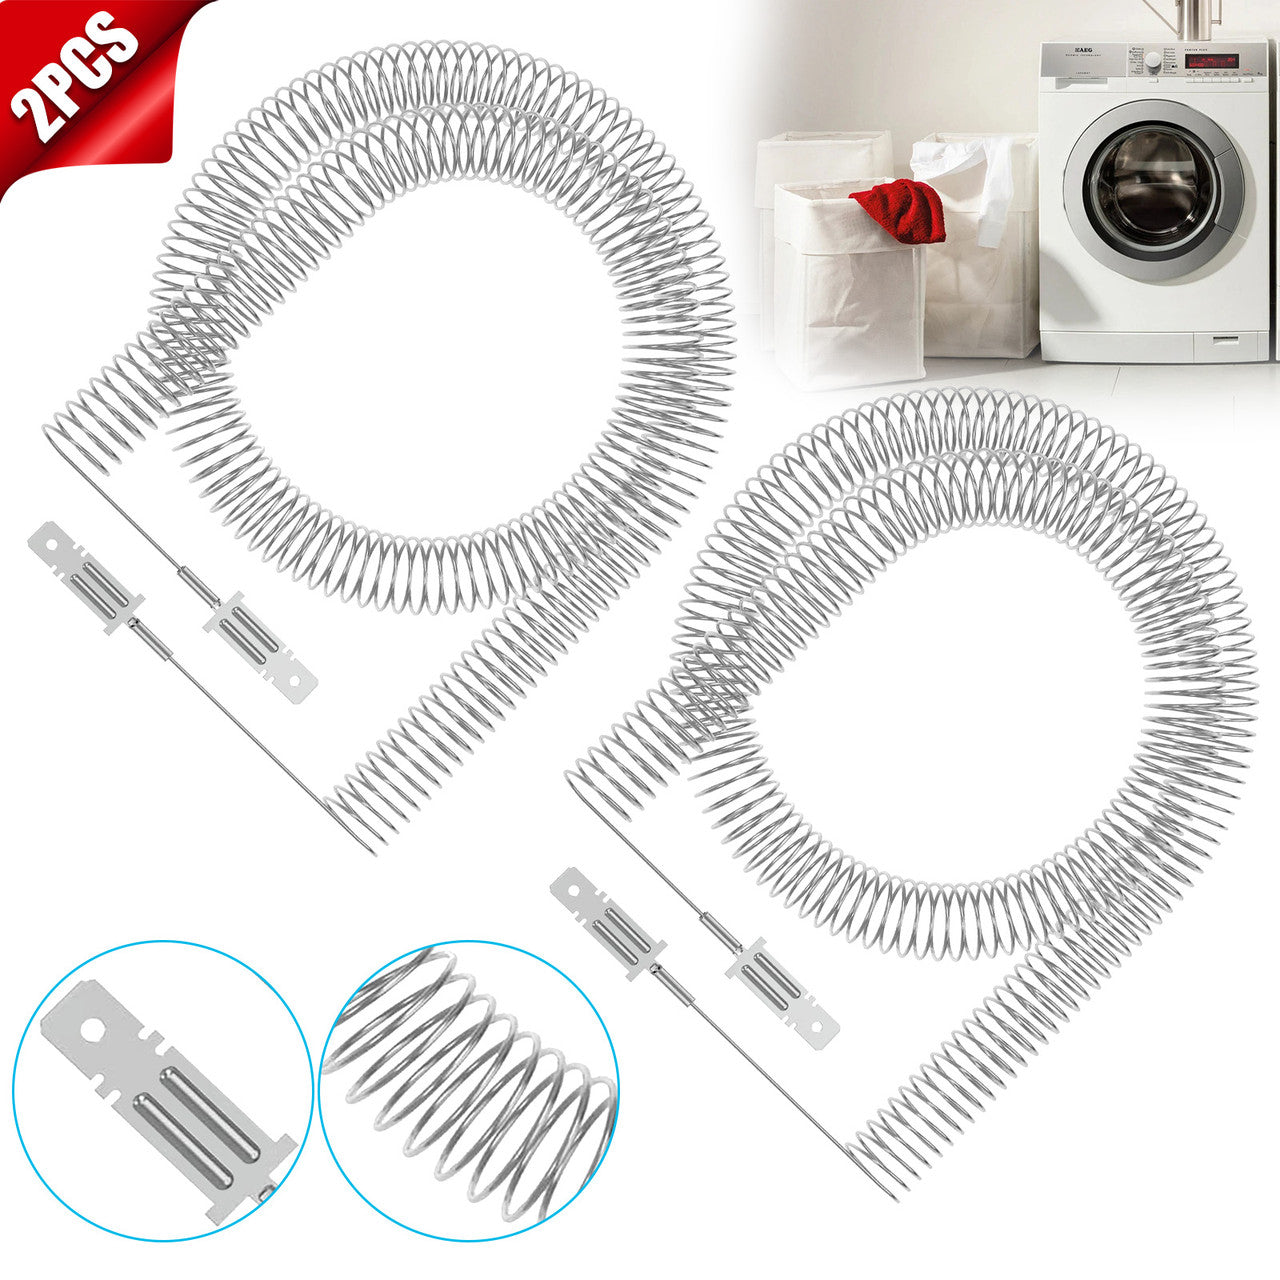 Dryer Heating Element Coil - with pre lengthened coils For 5300622034 Frigidaire and Kenmore Dryers (Silver)